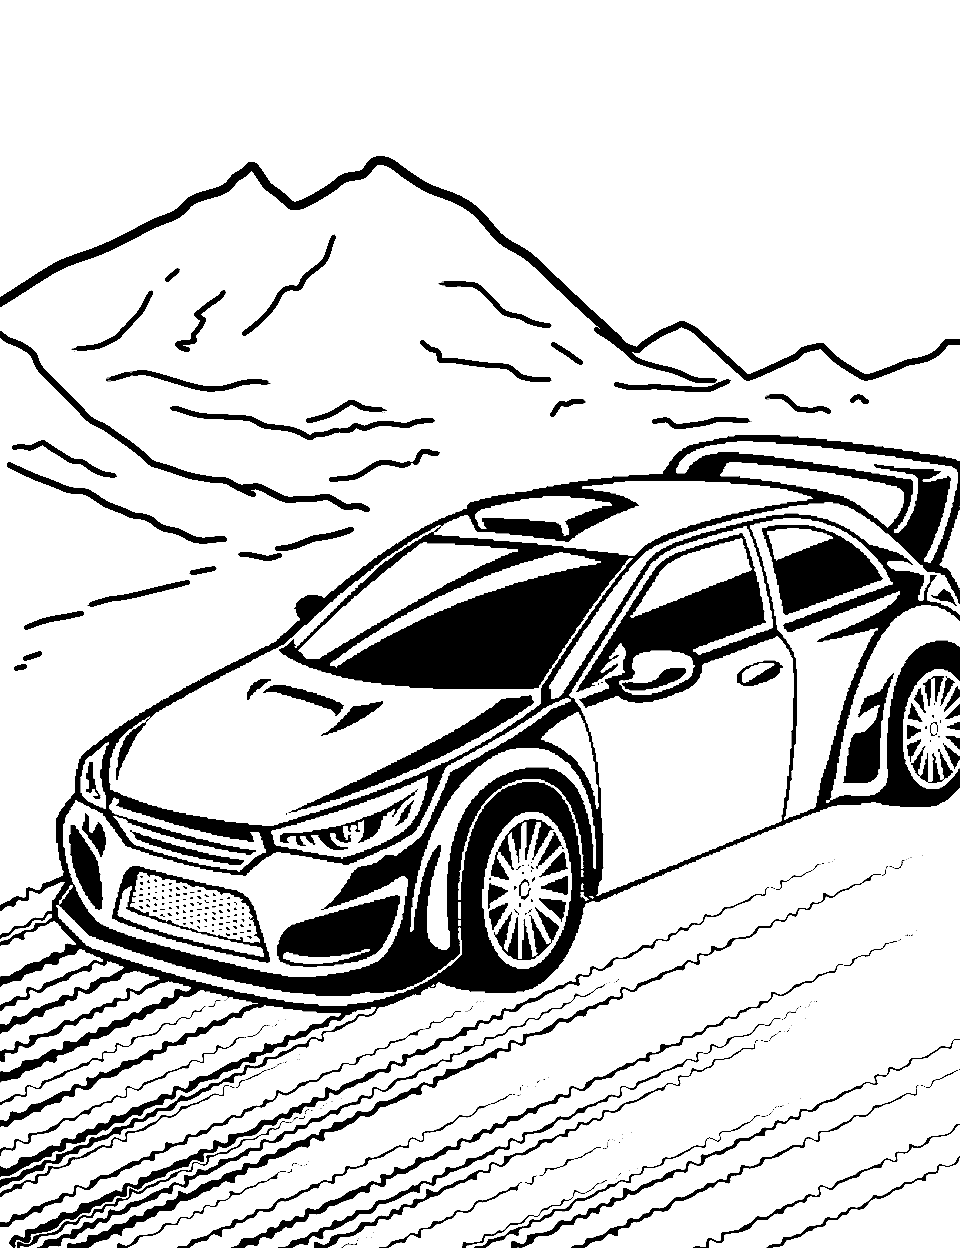 Off-Road Racer Race Car Coloring Page - A race car adapted for off-road terrain.